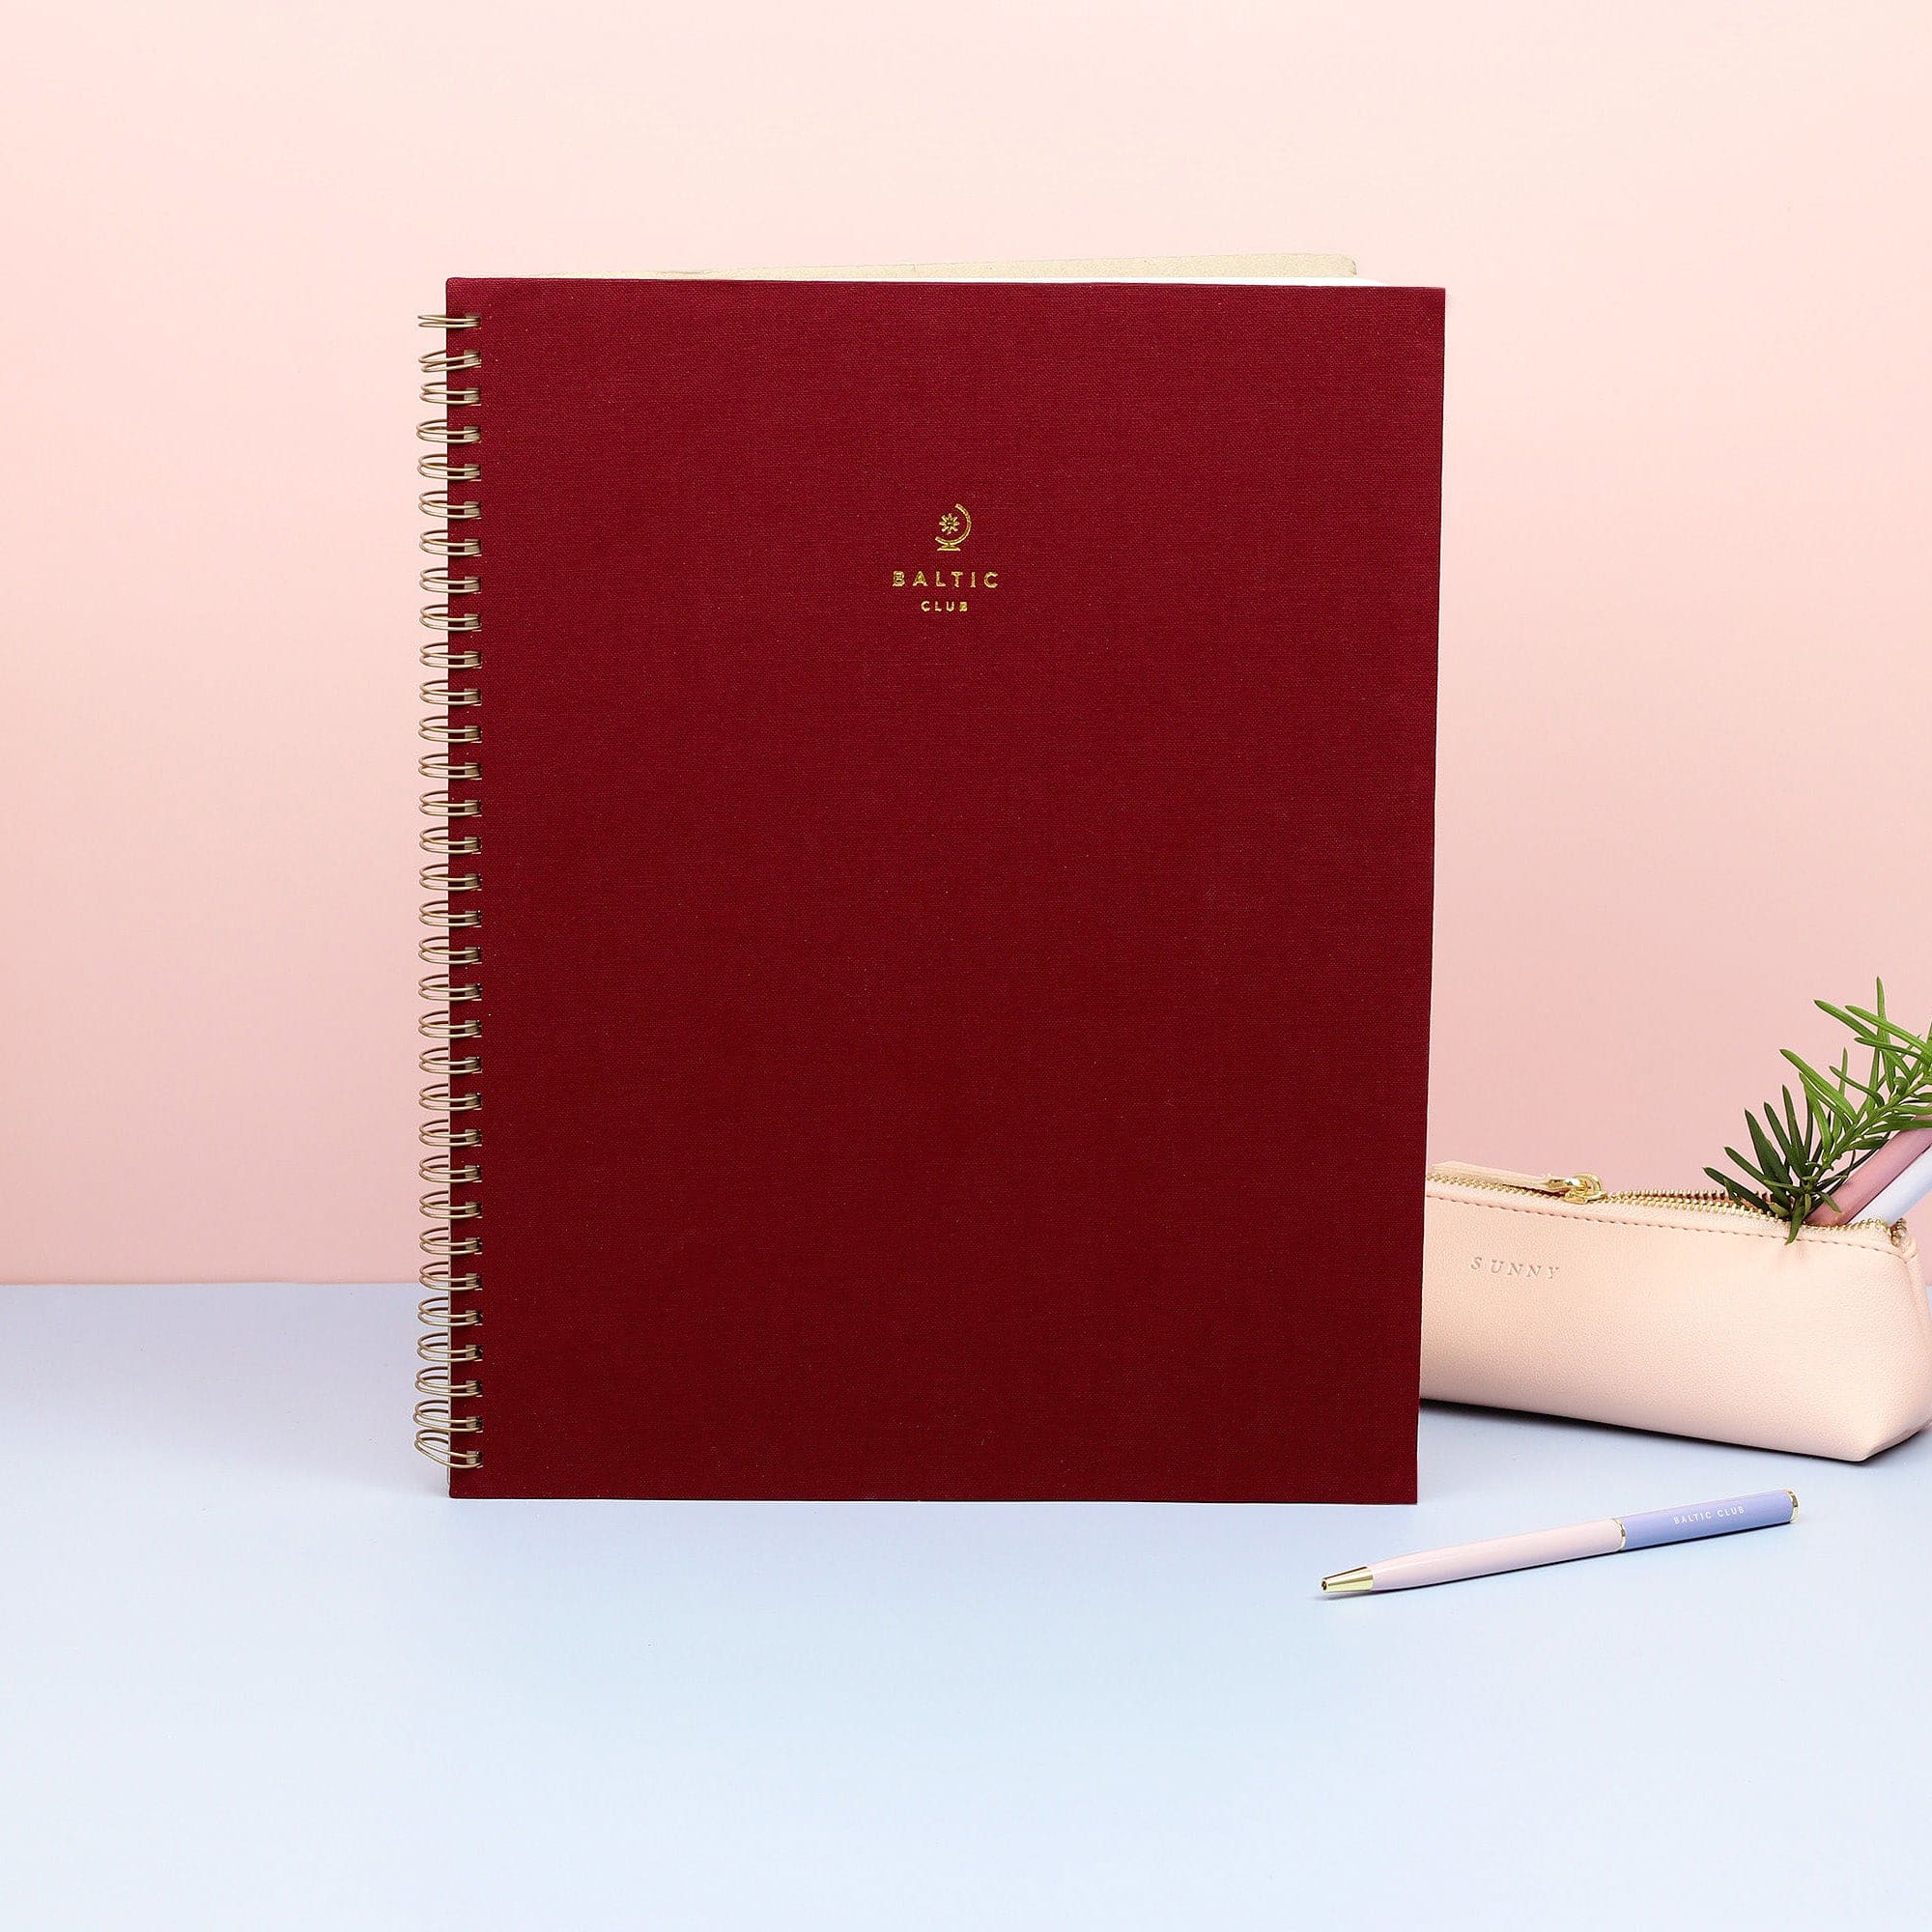 The large burgundy cloth-covered spiral notebook by the Baltic Club standing in front of pink decor